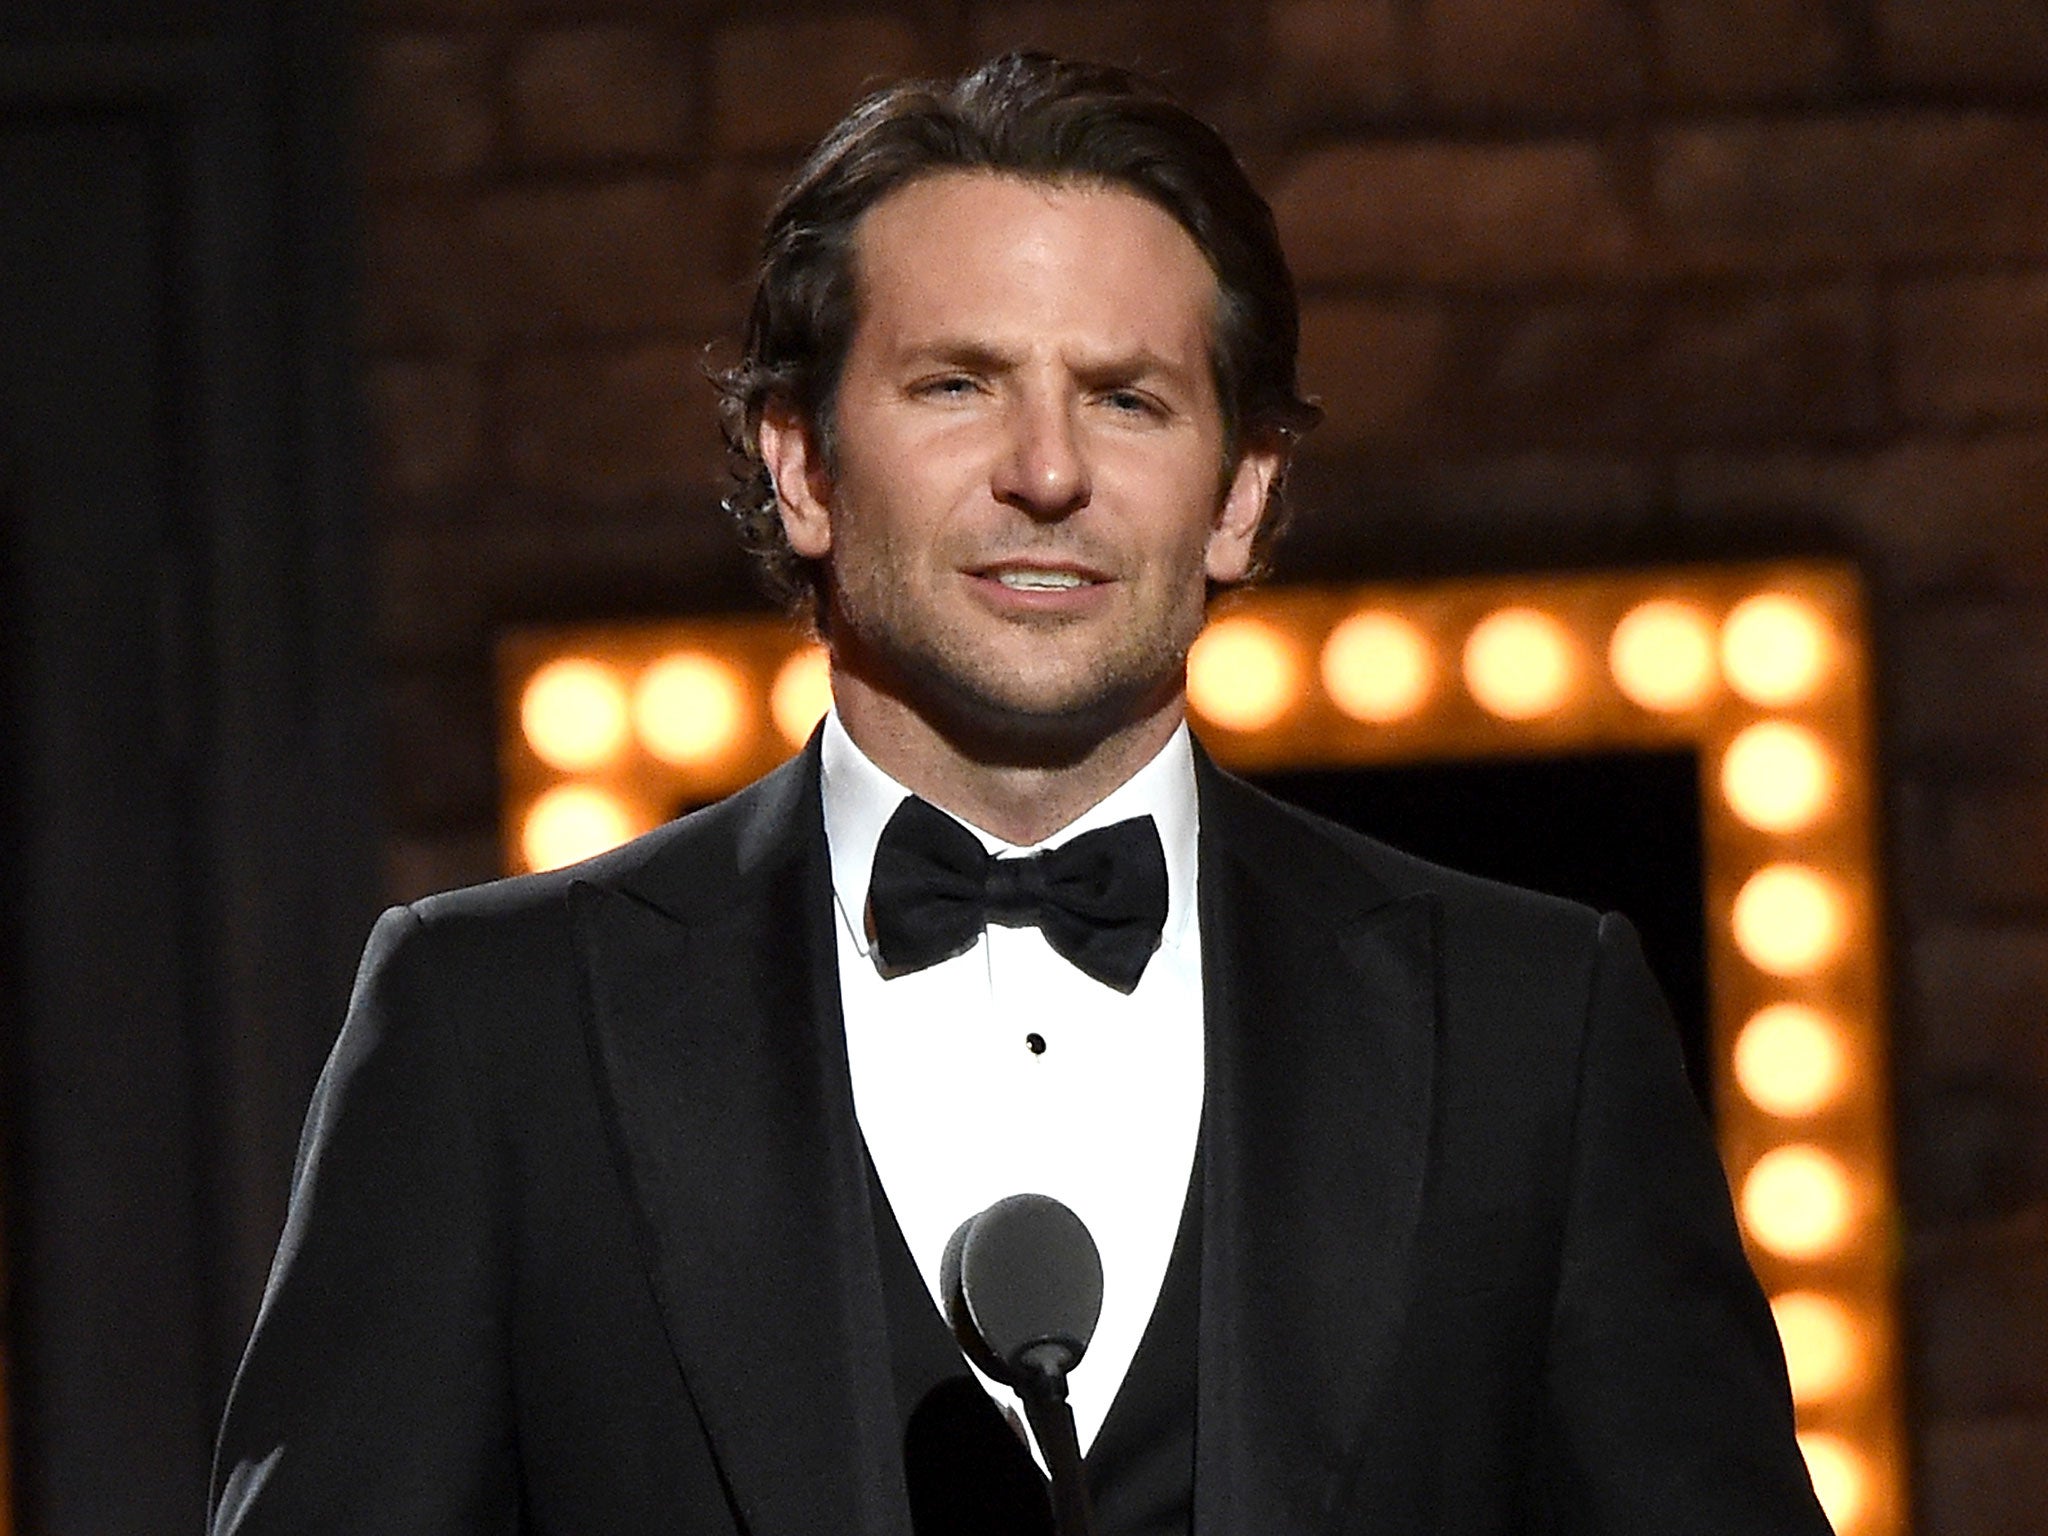 Bradley Cooper was the butt of the co-hosts' joke at the Tony Awards 2015